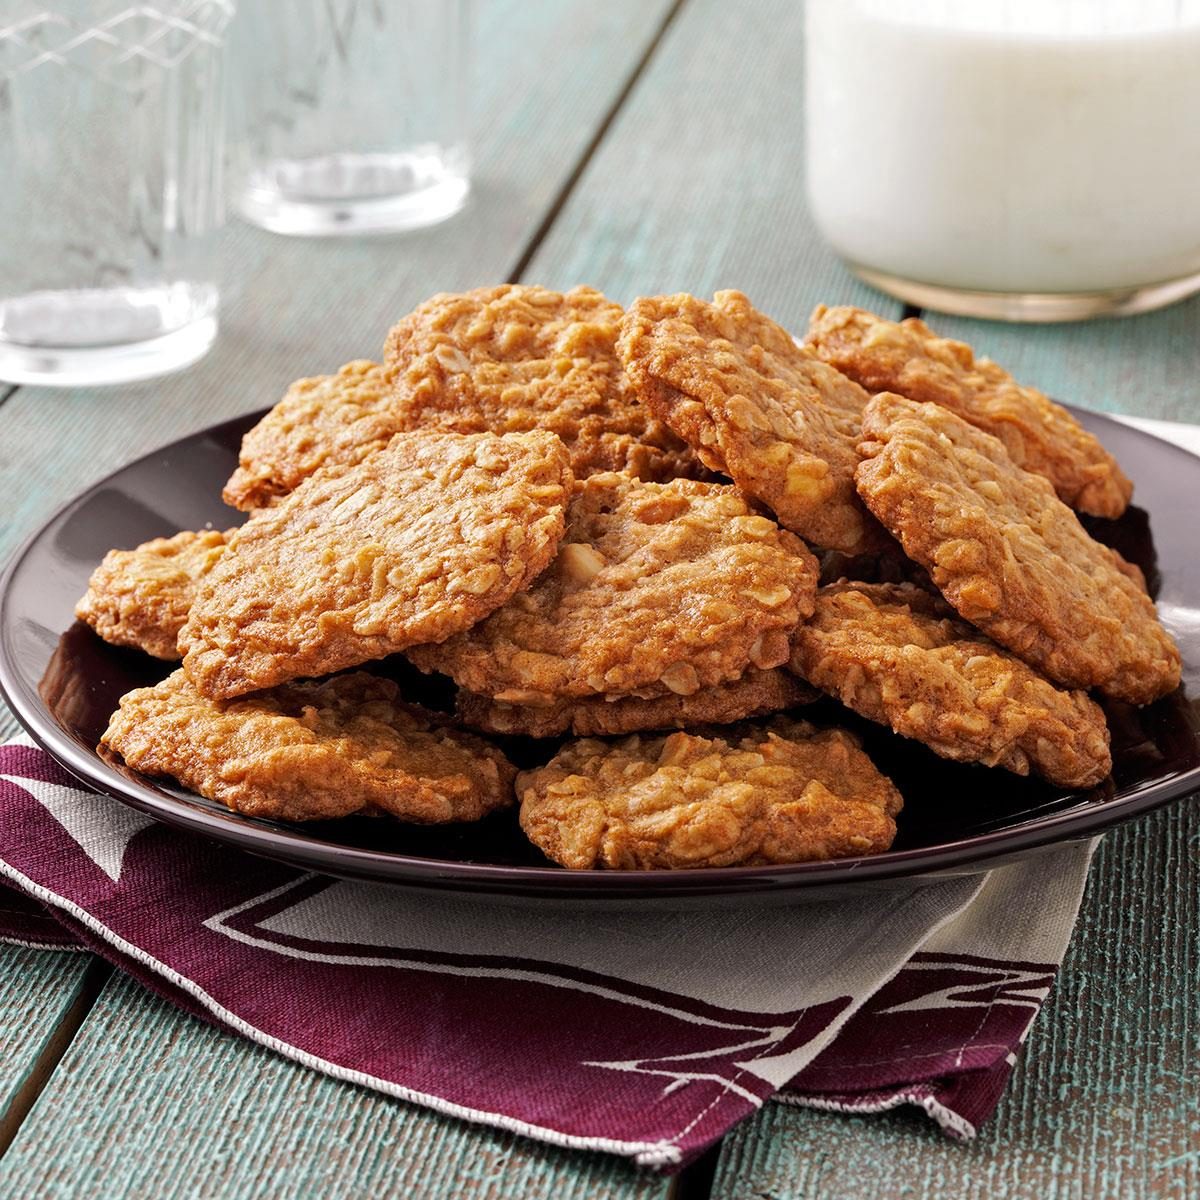 https://www.tasteofhome.com/wp-content/uploads/2018/01/Toasted-Oatmeal-Cookies_exps4552_CRC2375008D08_17_2b_RMS.jpg